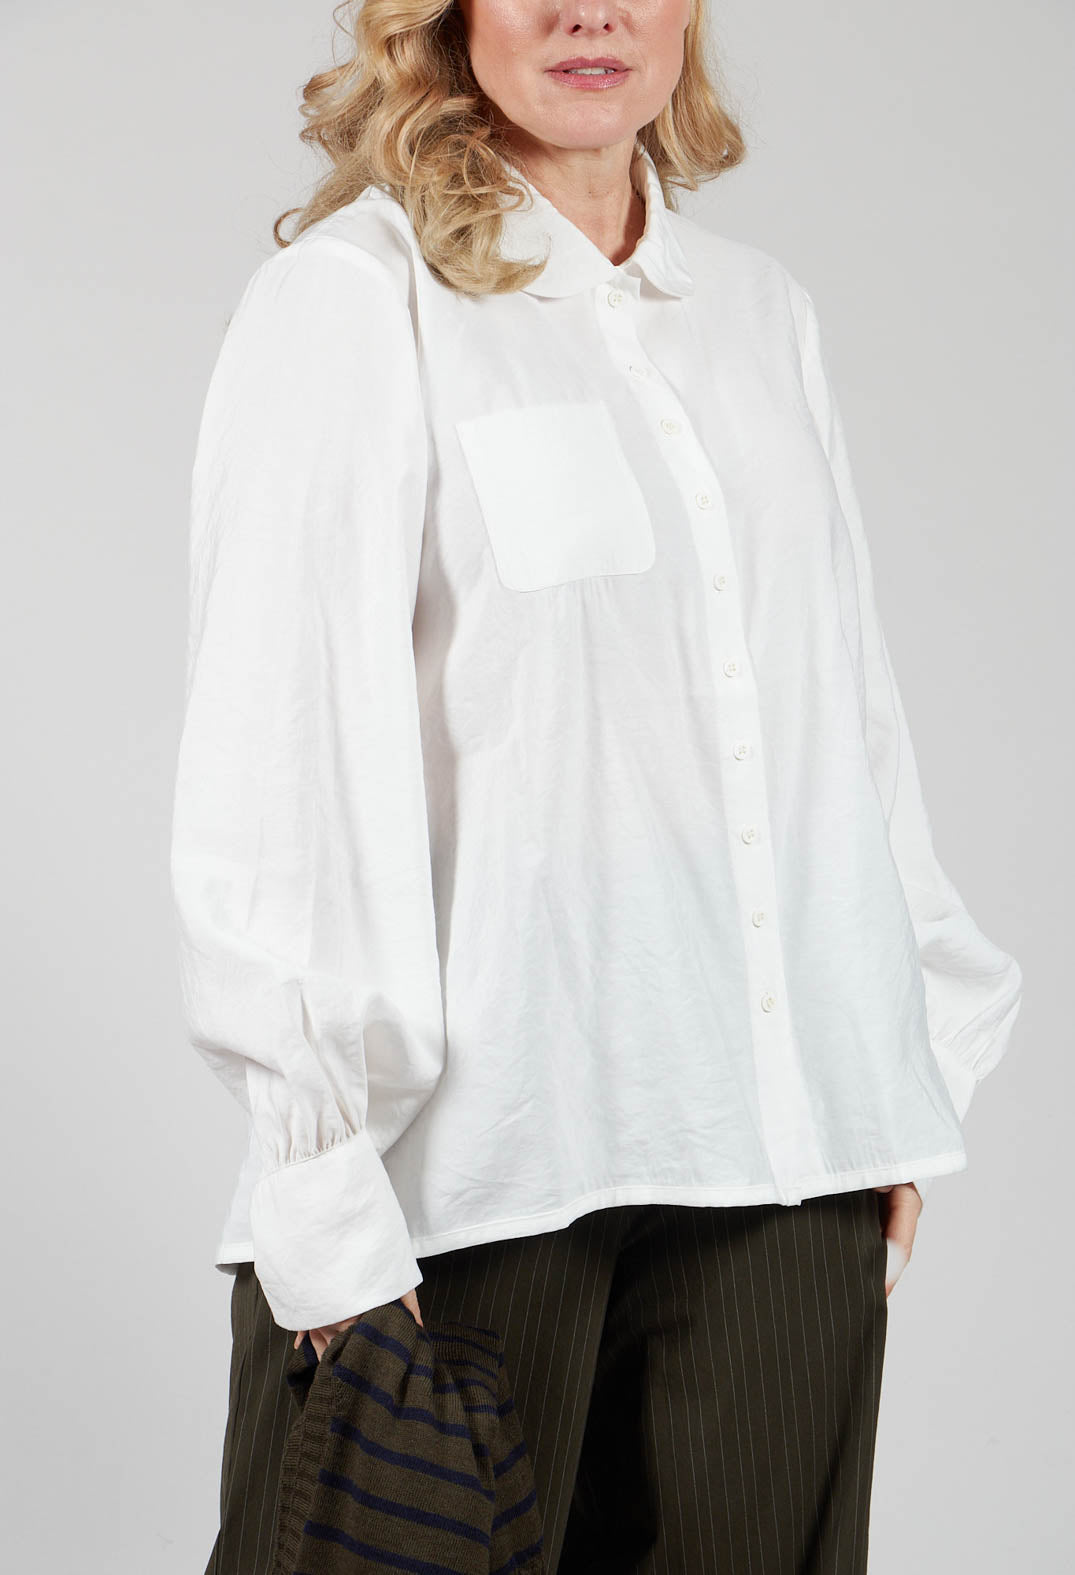 Shirt with Gathered Cuffs in White